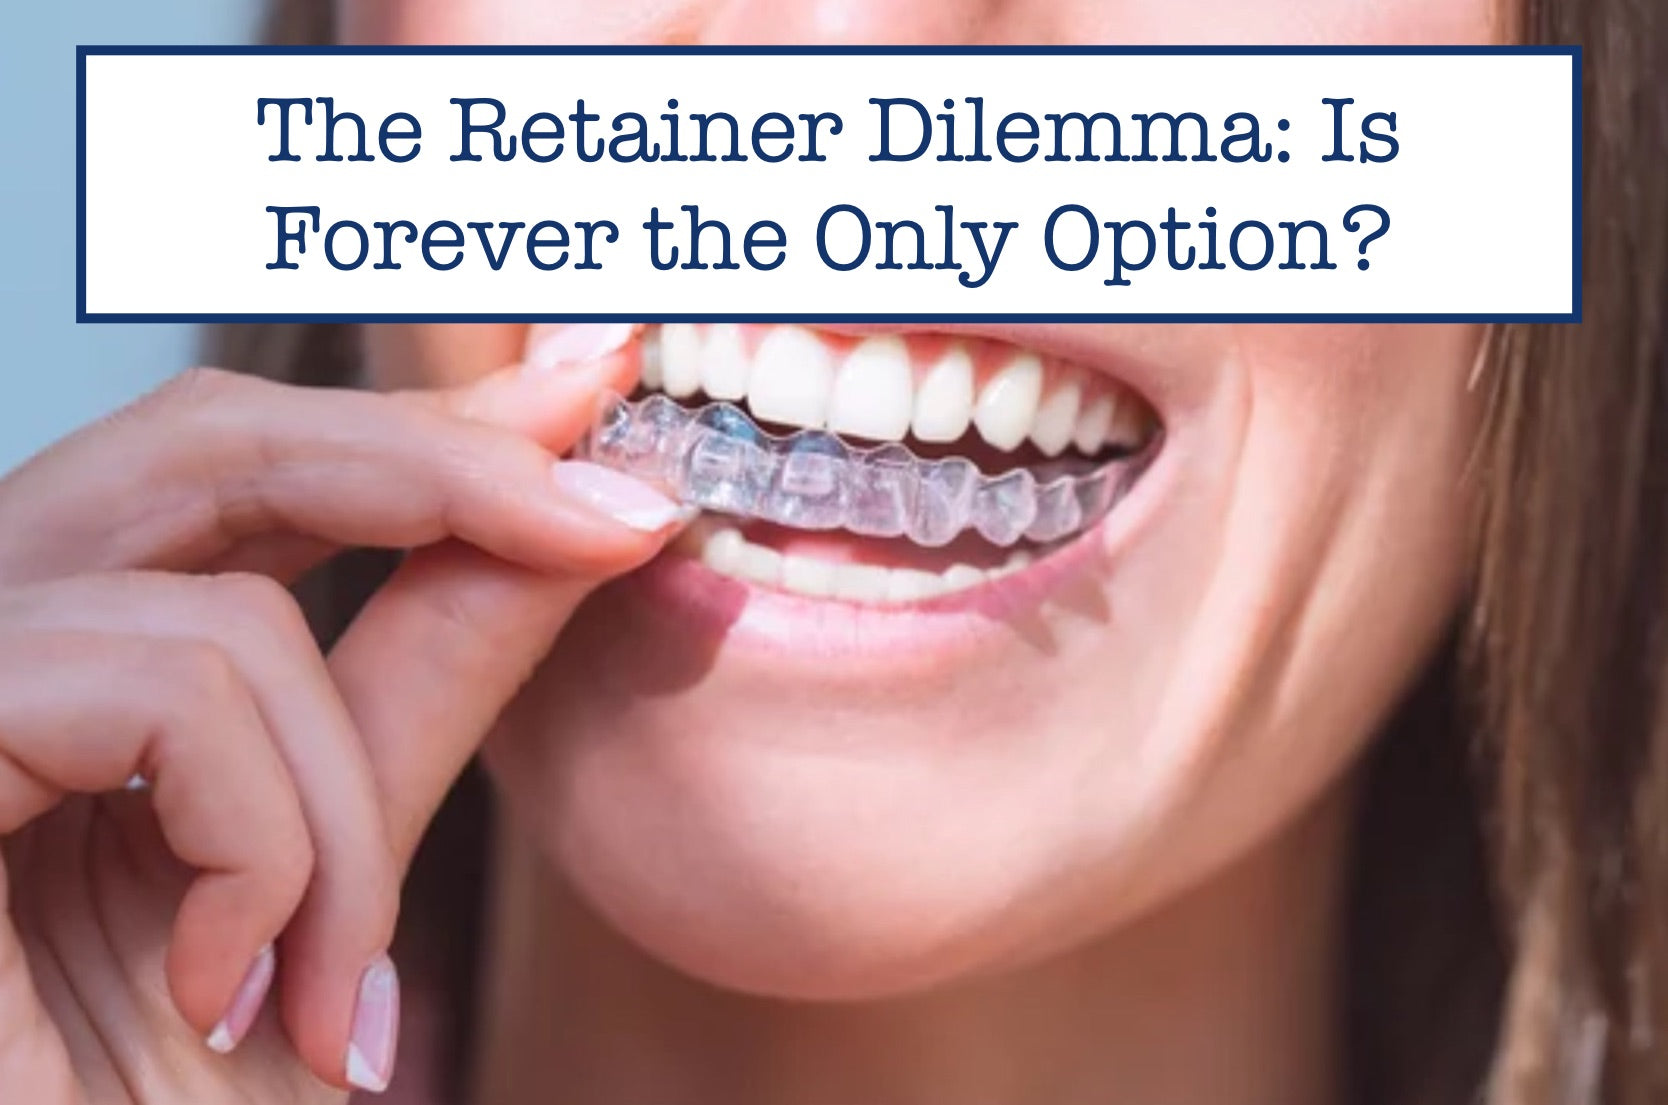 The Retainer Dilemma: Is Forever the Only Option?